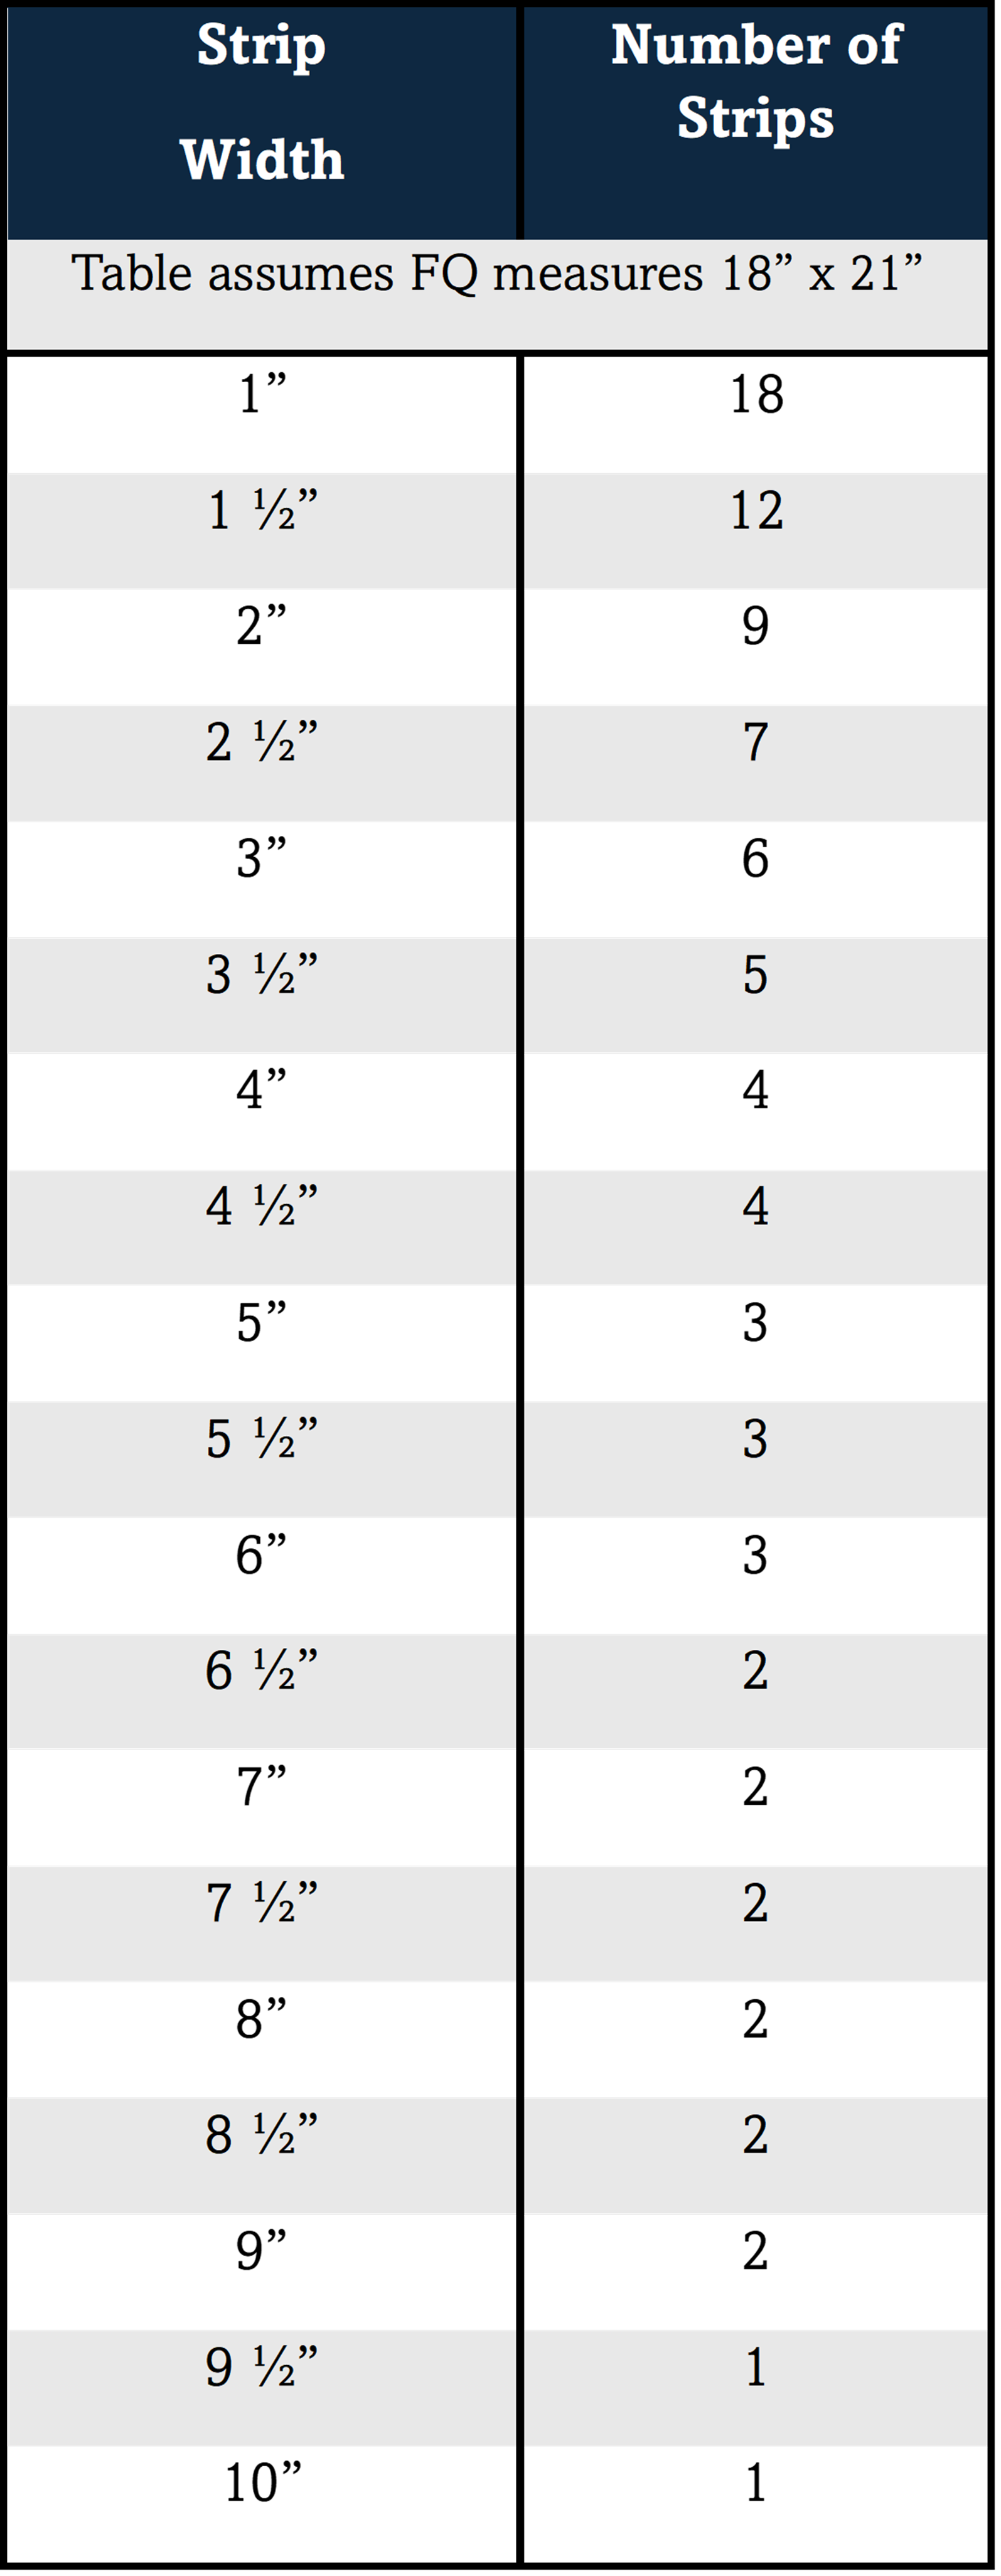 Grey and white table showing how many different width strips can be cut from a Fat Quarter.